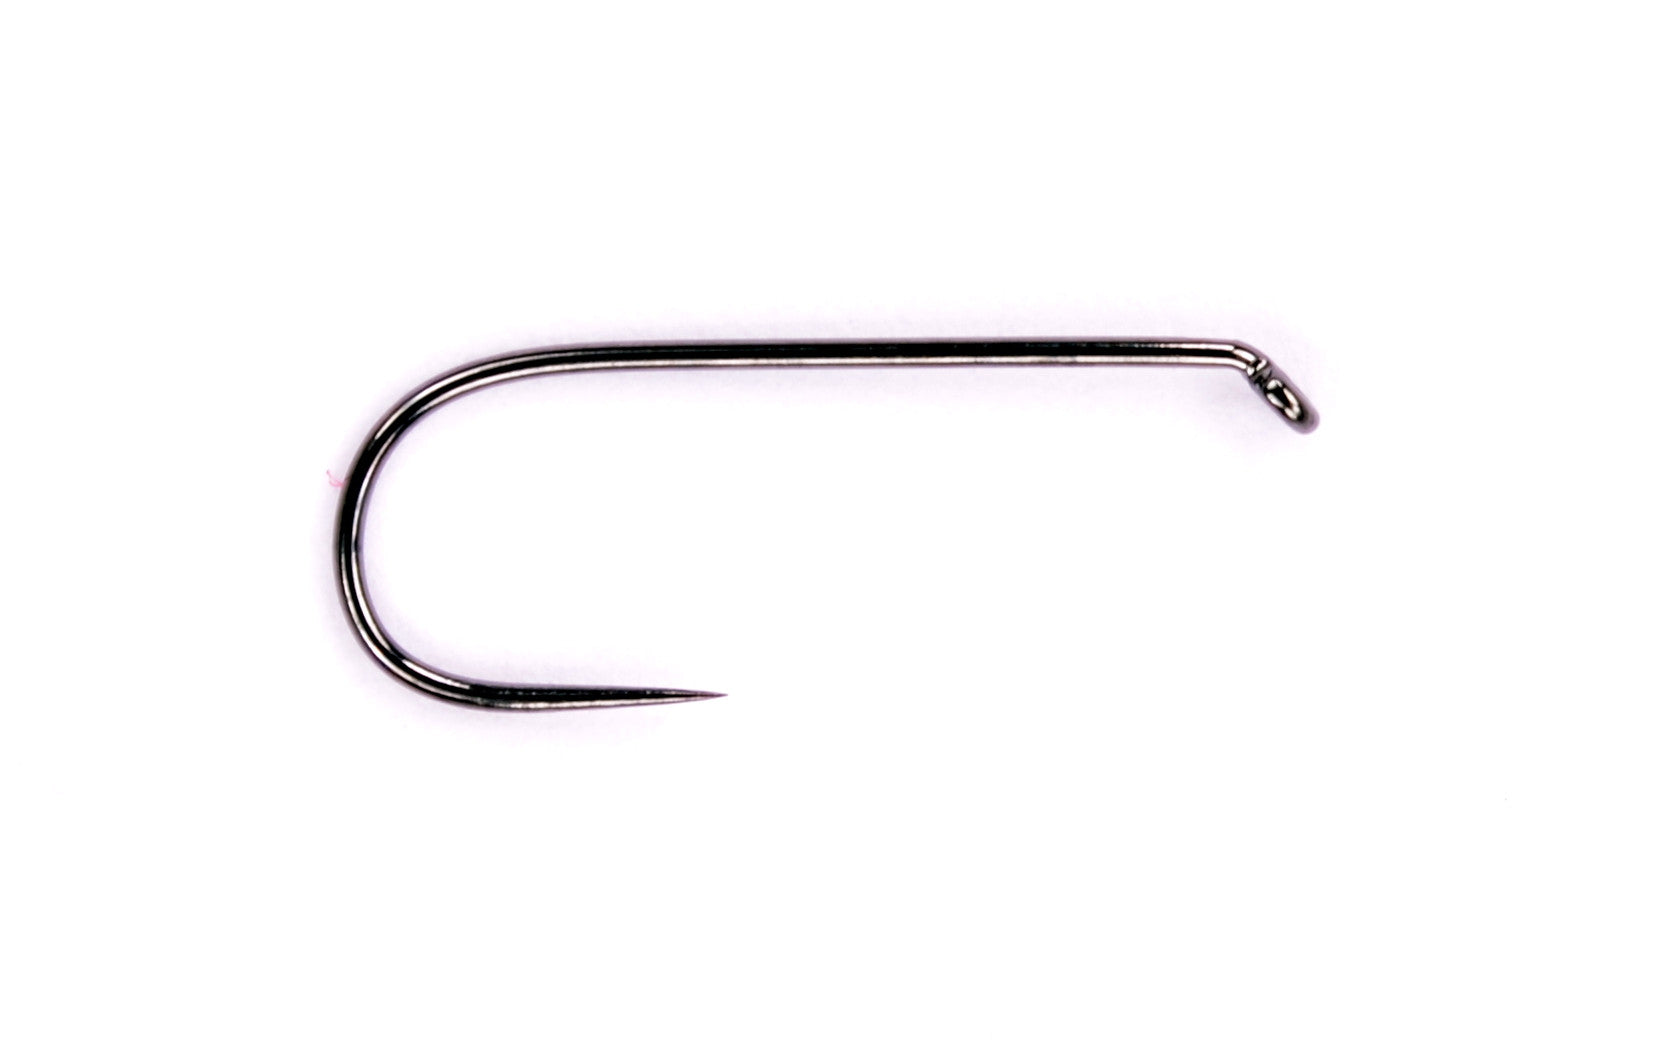 Dragon Barbless Fly Hooks Fine Wire Dry/Spider Hook